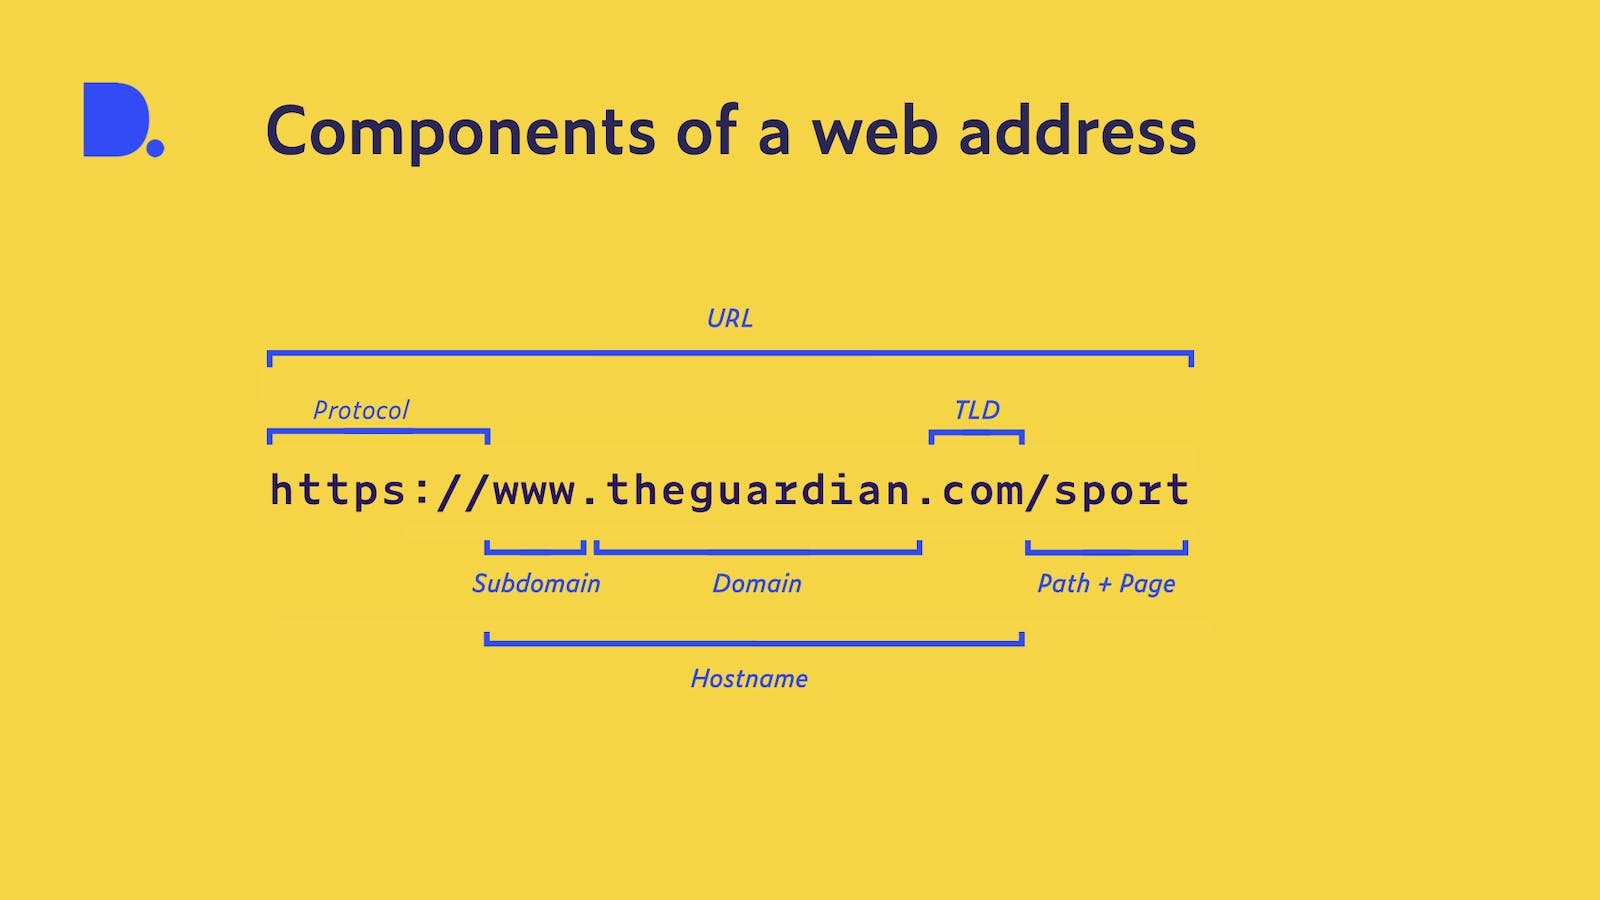 Image explaining the components of a web address using the url https://www.theguradian.com/sport as a reference. 'https://' is the protocol. 'www' is the subdomain. 'theguardian'is the domain, '.com' is the Top Level Domain (TLD), '/sport' is the path and page. The entire sequence 'www.theguardian.com' is colled the hostname.